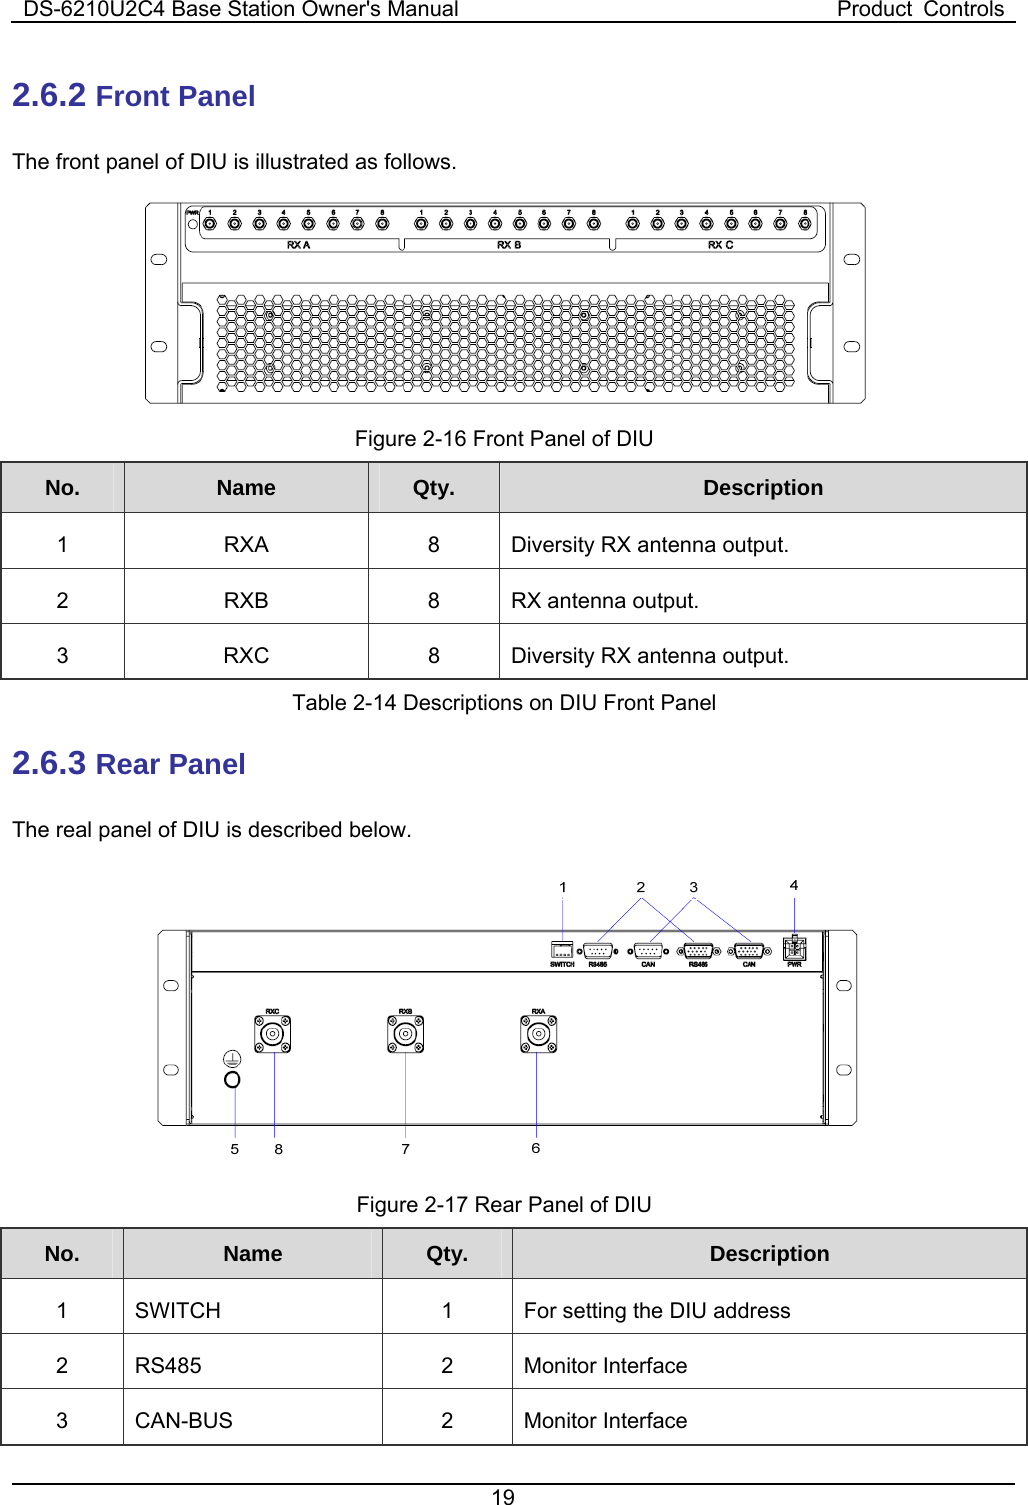 DS-6210U2C4 Base Station Owner&apos;s Manual  Product  Controls 19  2.6.2 Front Panel   The front panel of DIU is illustrated as follows.    Figure 2-16 Front Panel of DIU No.  Name   Qty.  Description 1  RXA  8  Diversity RX antenna output. 2 RXB  8 RX antenna output. 3  RXC  8  Diversity RX antenna output. Table 2-14 Descriptions on DIU Front Panel 2.6.3 Rear Panel   The real panel of DIU is described below.      Figure 2-17 Rear Panel of DIU No.  Name   Qty.  Description 1  SWITCH  1  For setting the DIU address 2 RS485  2  Monitor Interface  3 CAN-BUS  2  Monitor Interface  